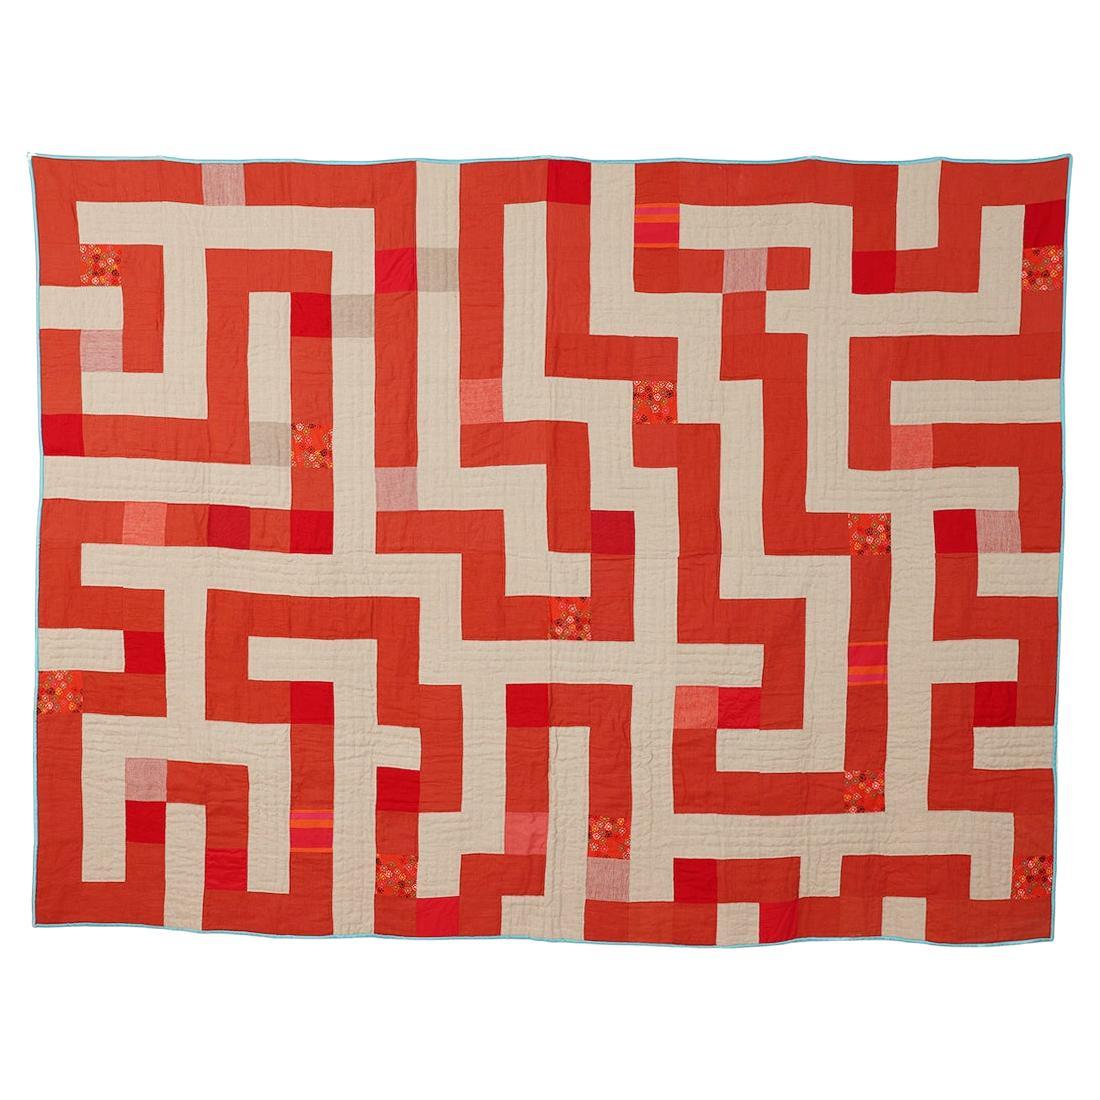 Contemporary hand-sewn Meander quilt by British master maker For Sale